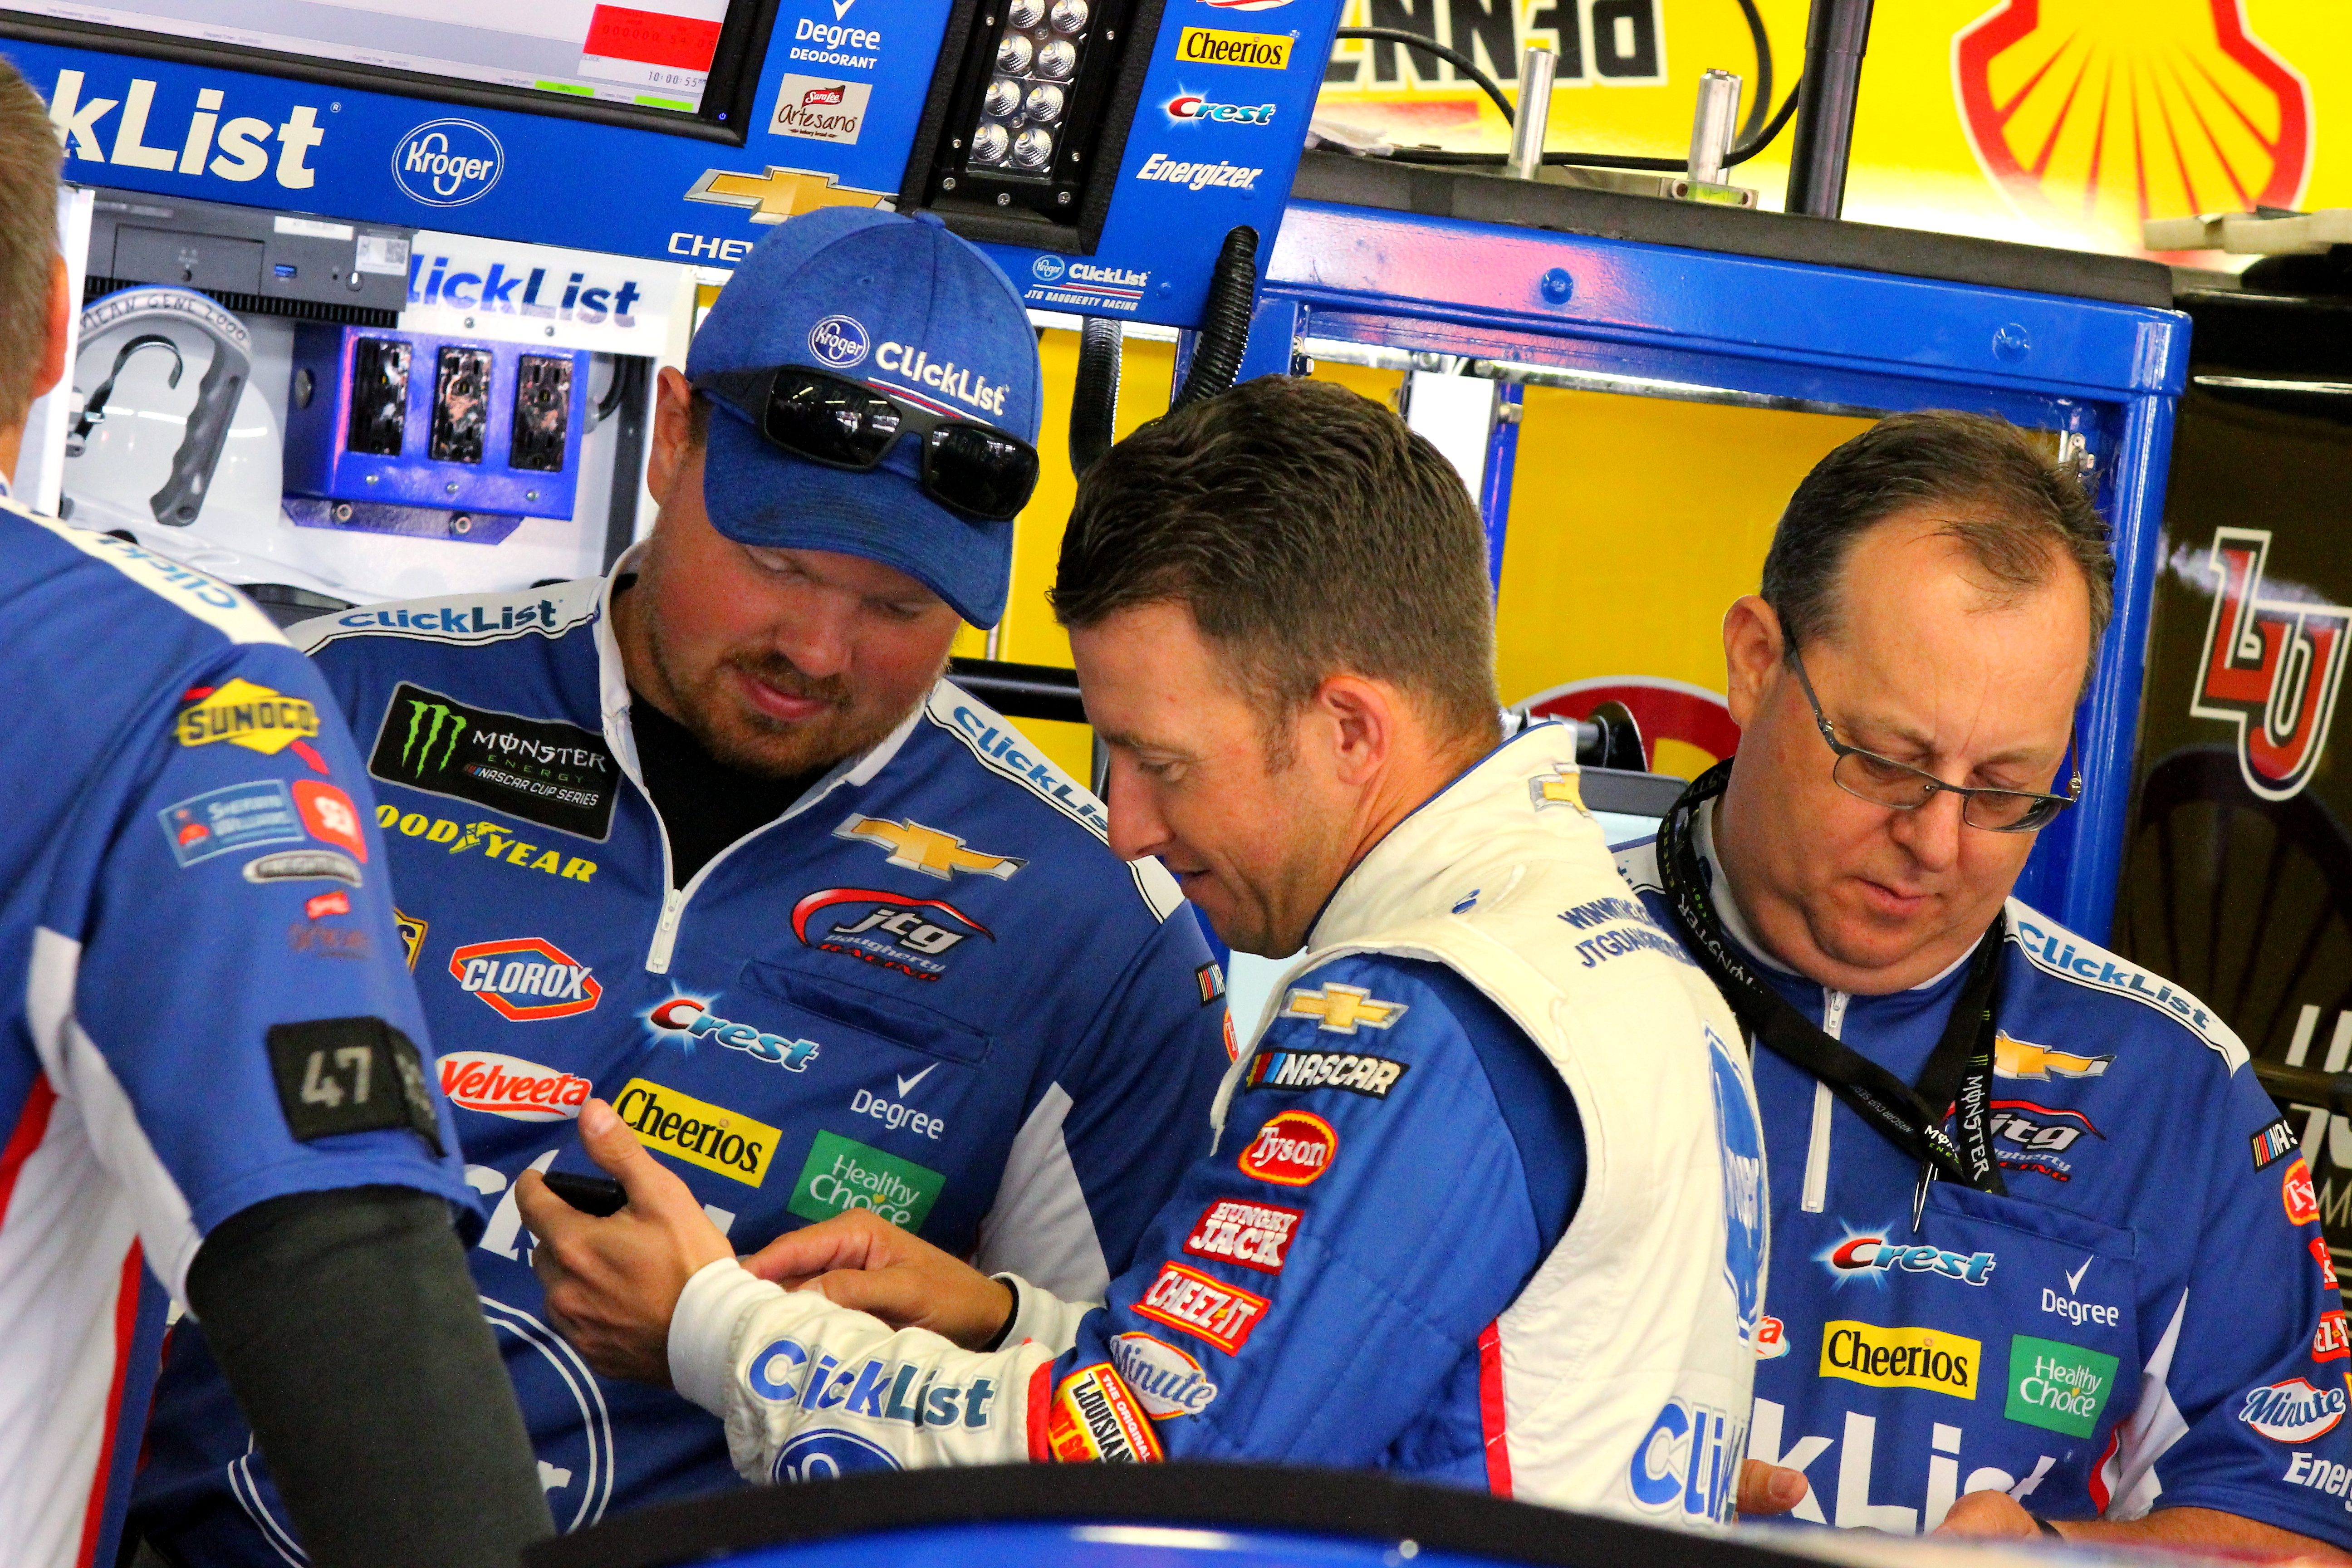 Whether it's talking with Jimmie Johnson or conferring with crew chief Tristan Smith, Allmendinger appreciates every moment in NASCAR. (Photo Credit: Josh Jones/TPF)